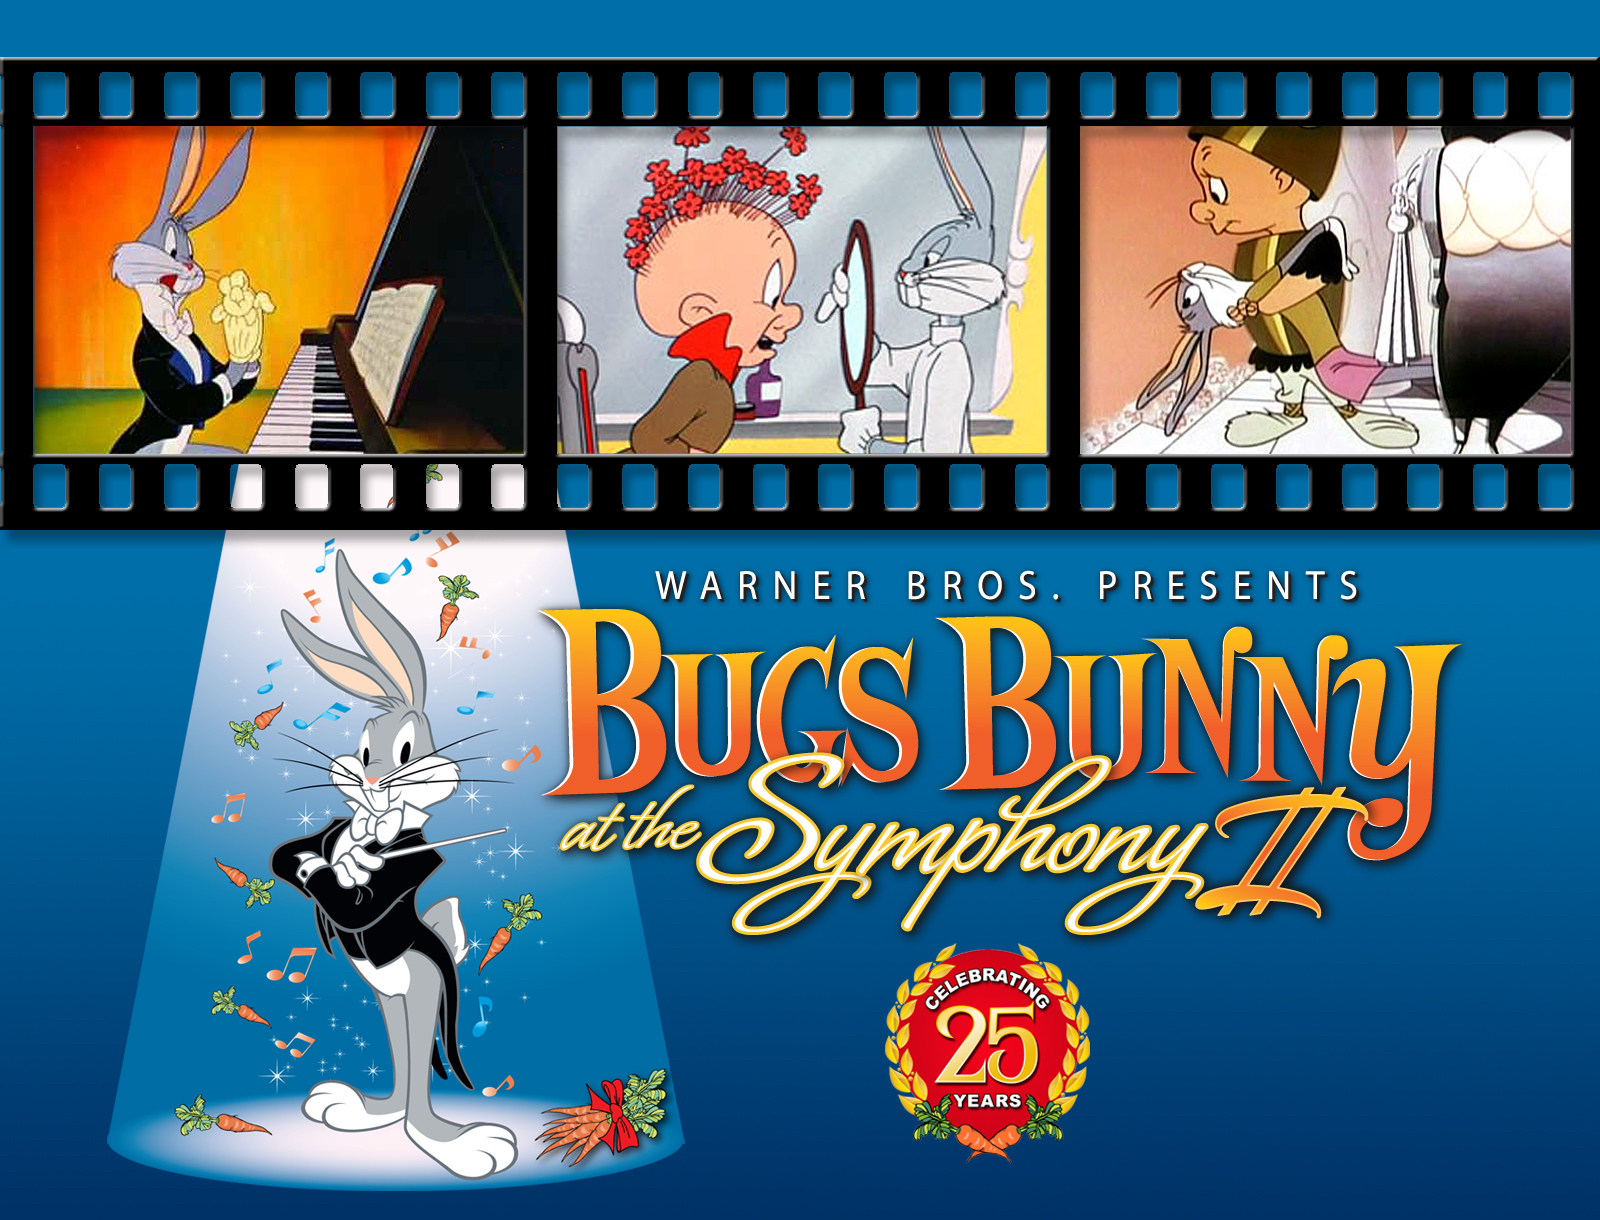 Warner Bros. presents “Bugs Bunny At The Symphony II” featuring Sinfonia Gulf Coast